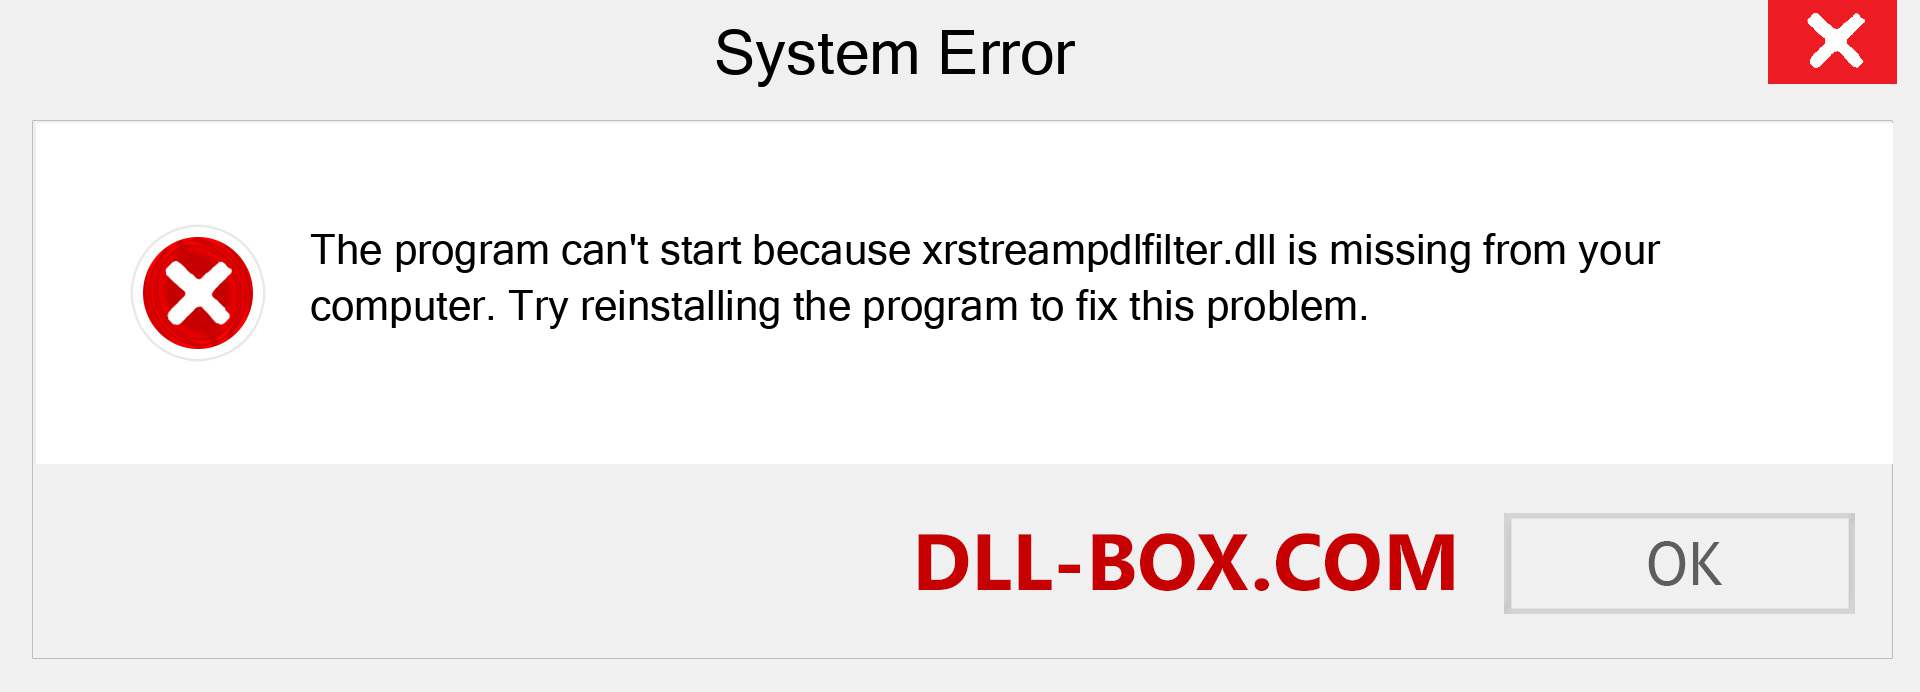  xrstreampdlfilter.dll file is missing?. Download for Windows 7, 8, 10 - Fix  xrstreampdlfilter dll Missing Error on Windows, photos, images